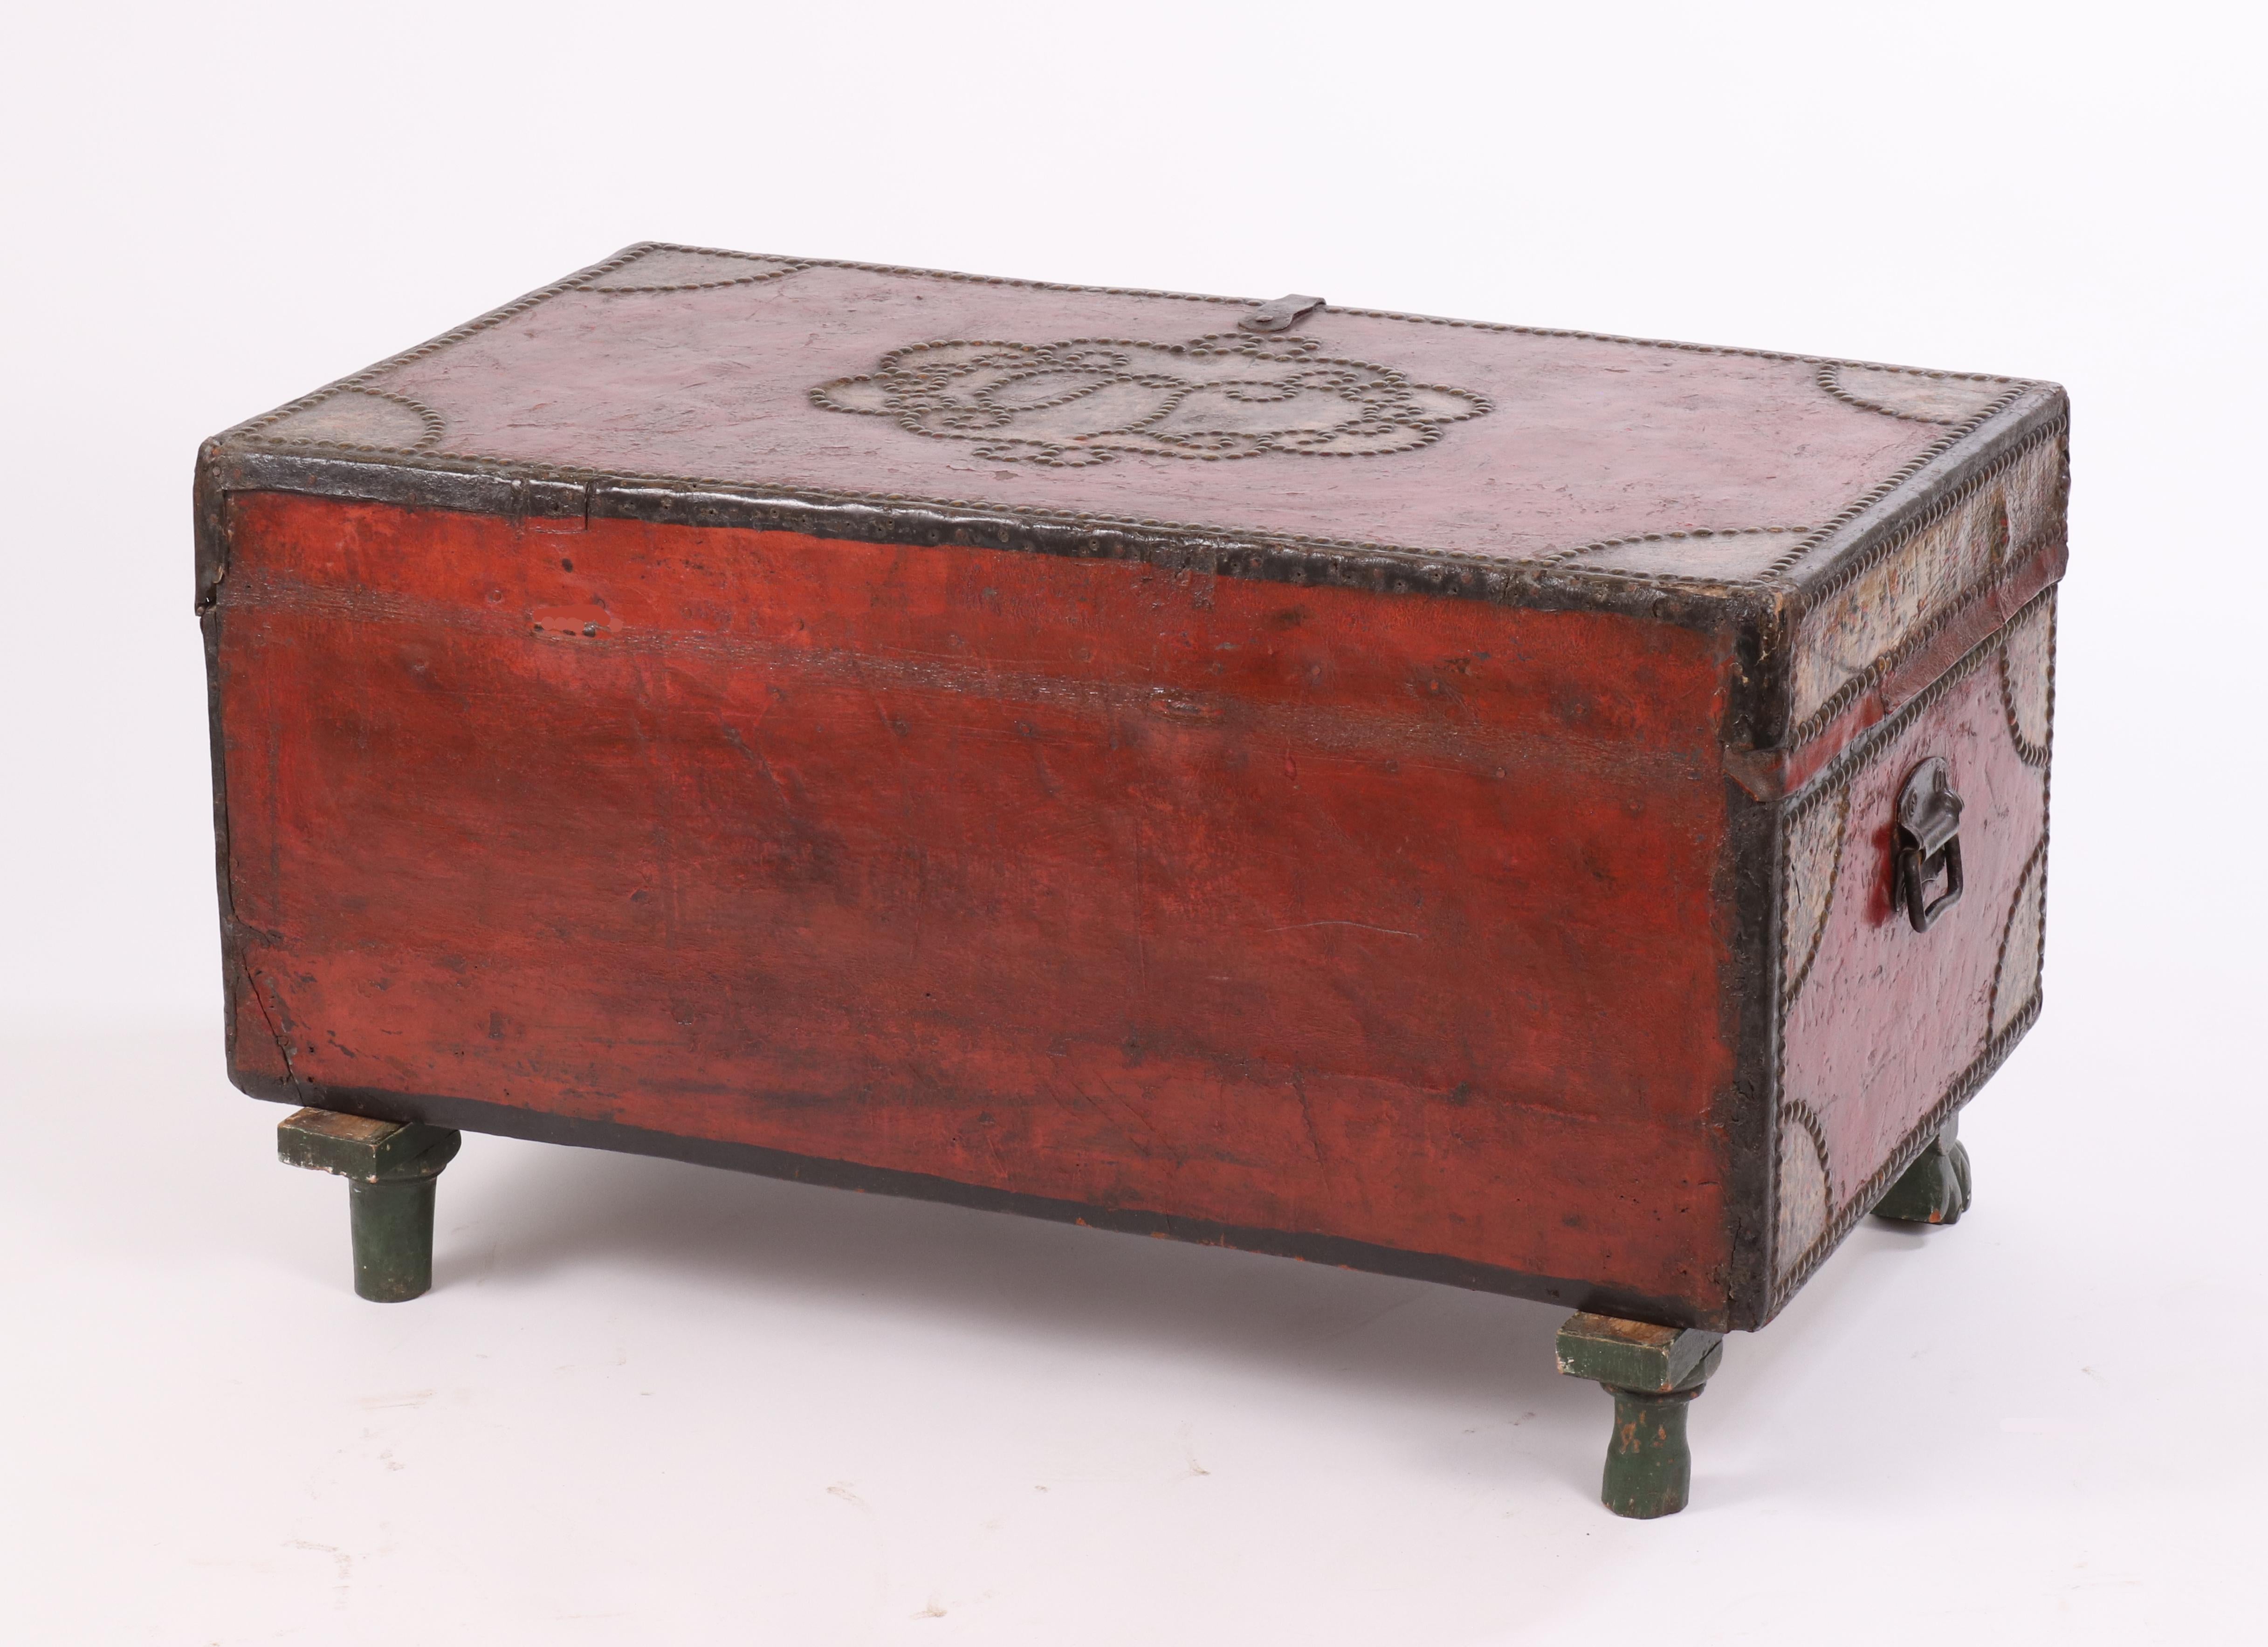 Chinese Export Leather Trunk, circa 1820 For Sale 2